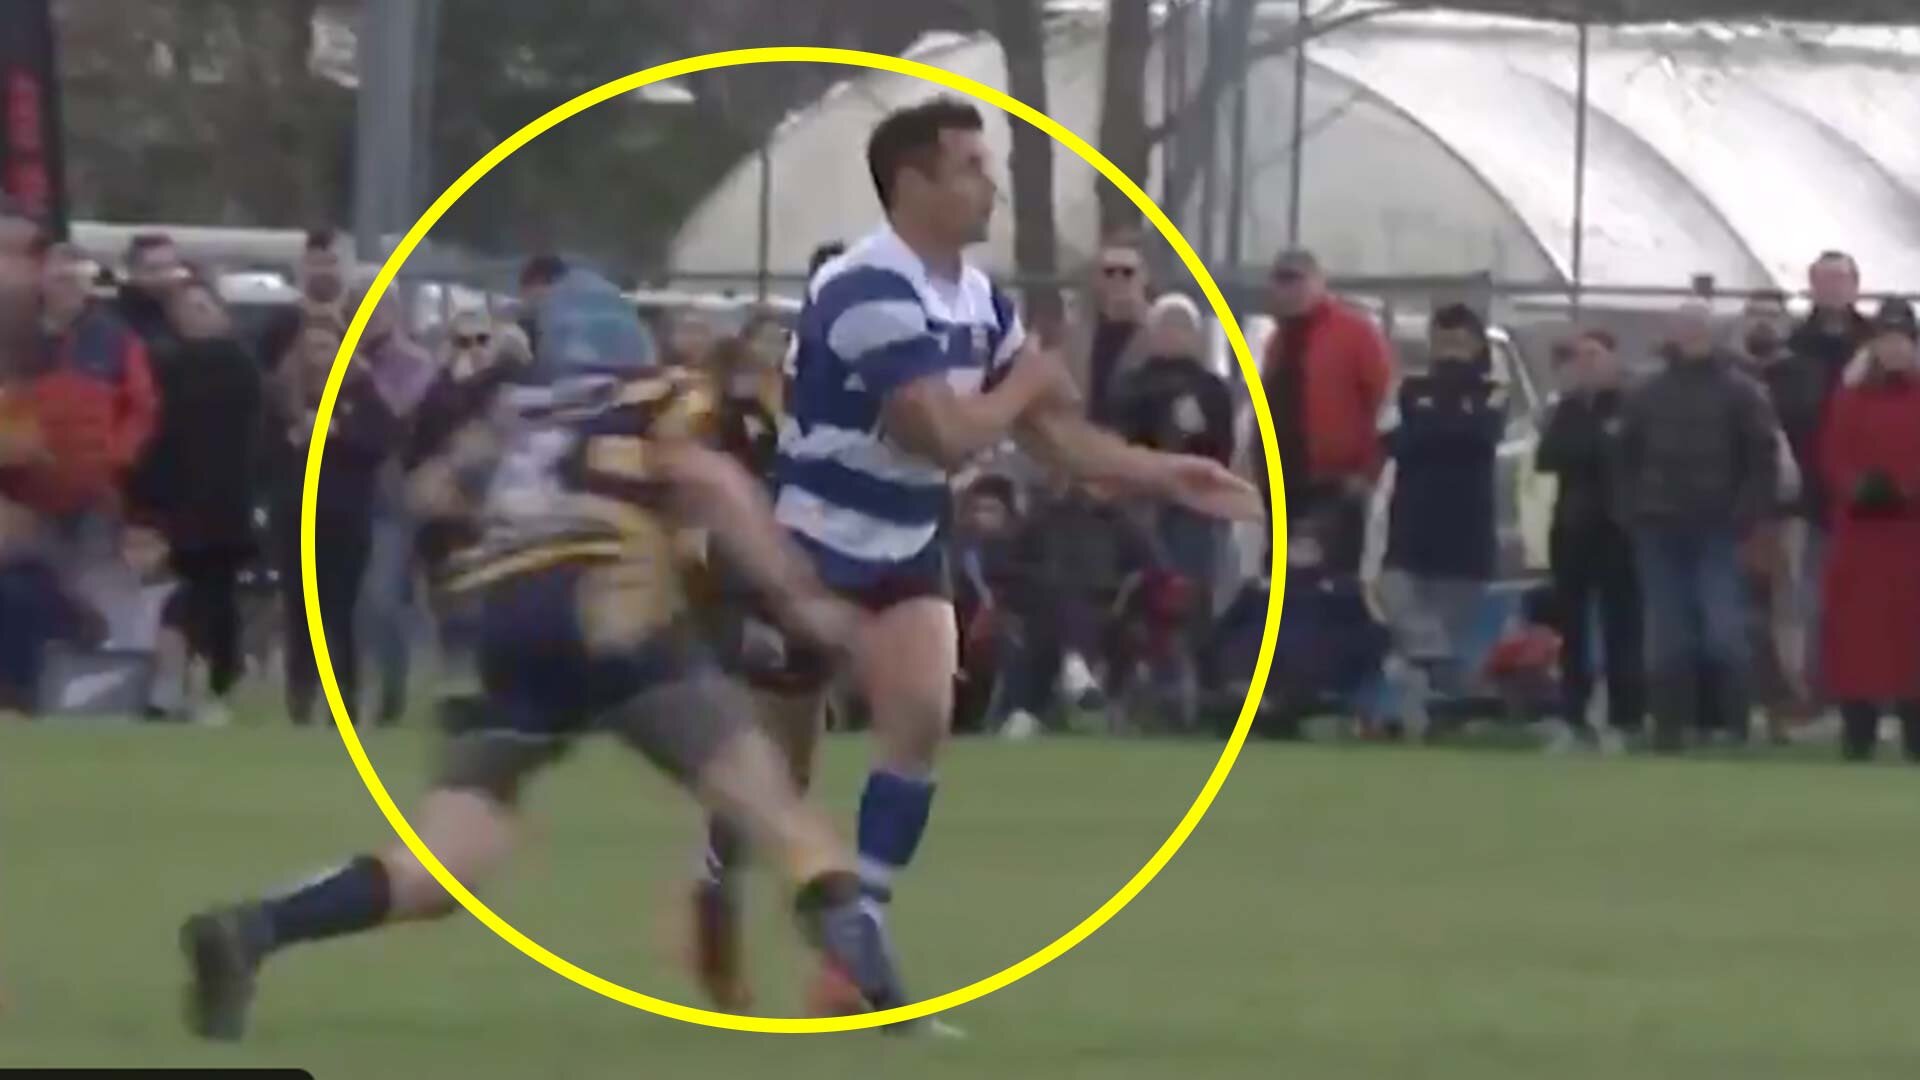 Dan Carter receives sickening hit on his return to a club rugby match this weekend